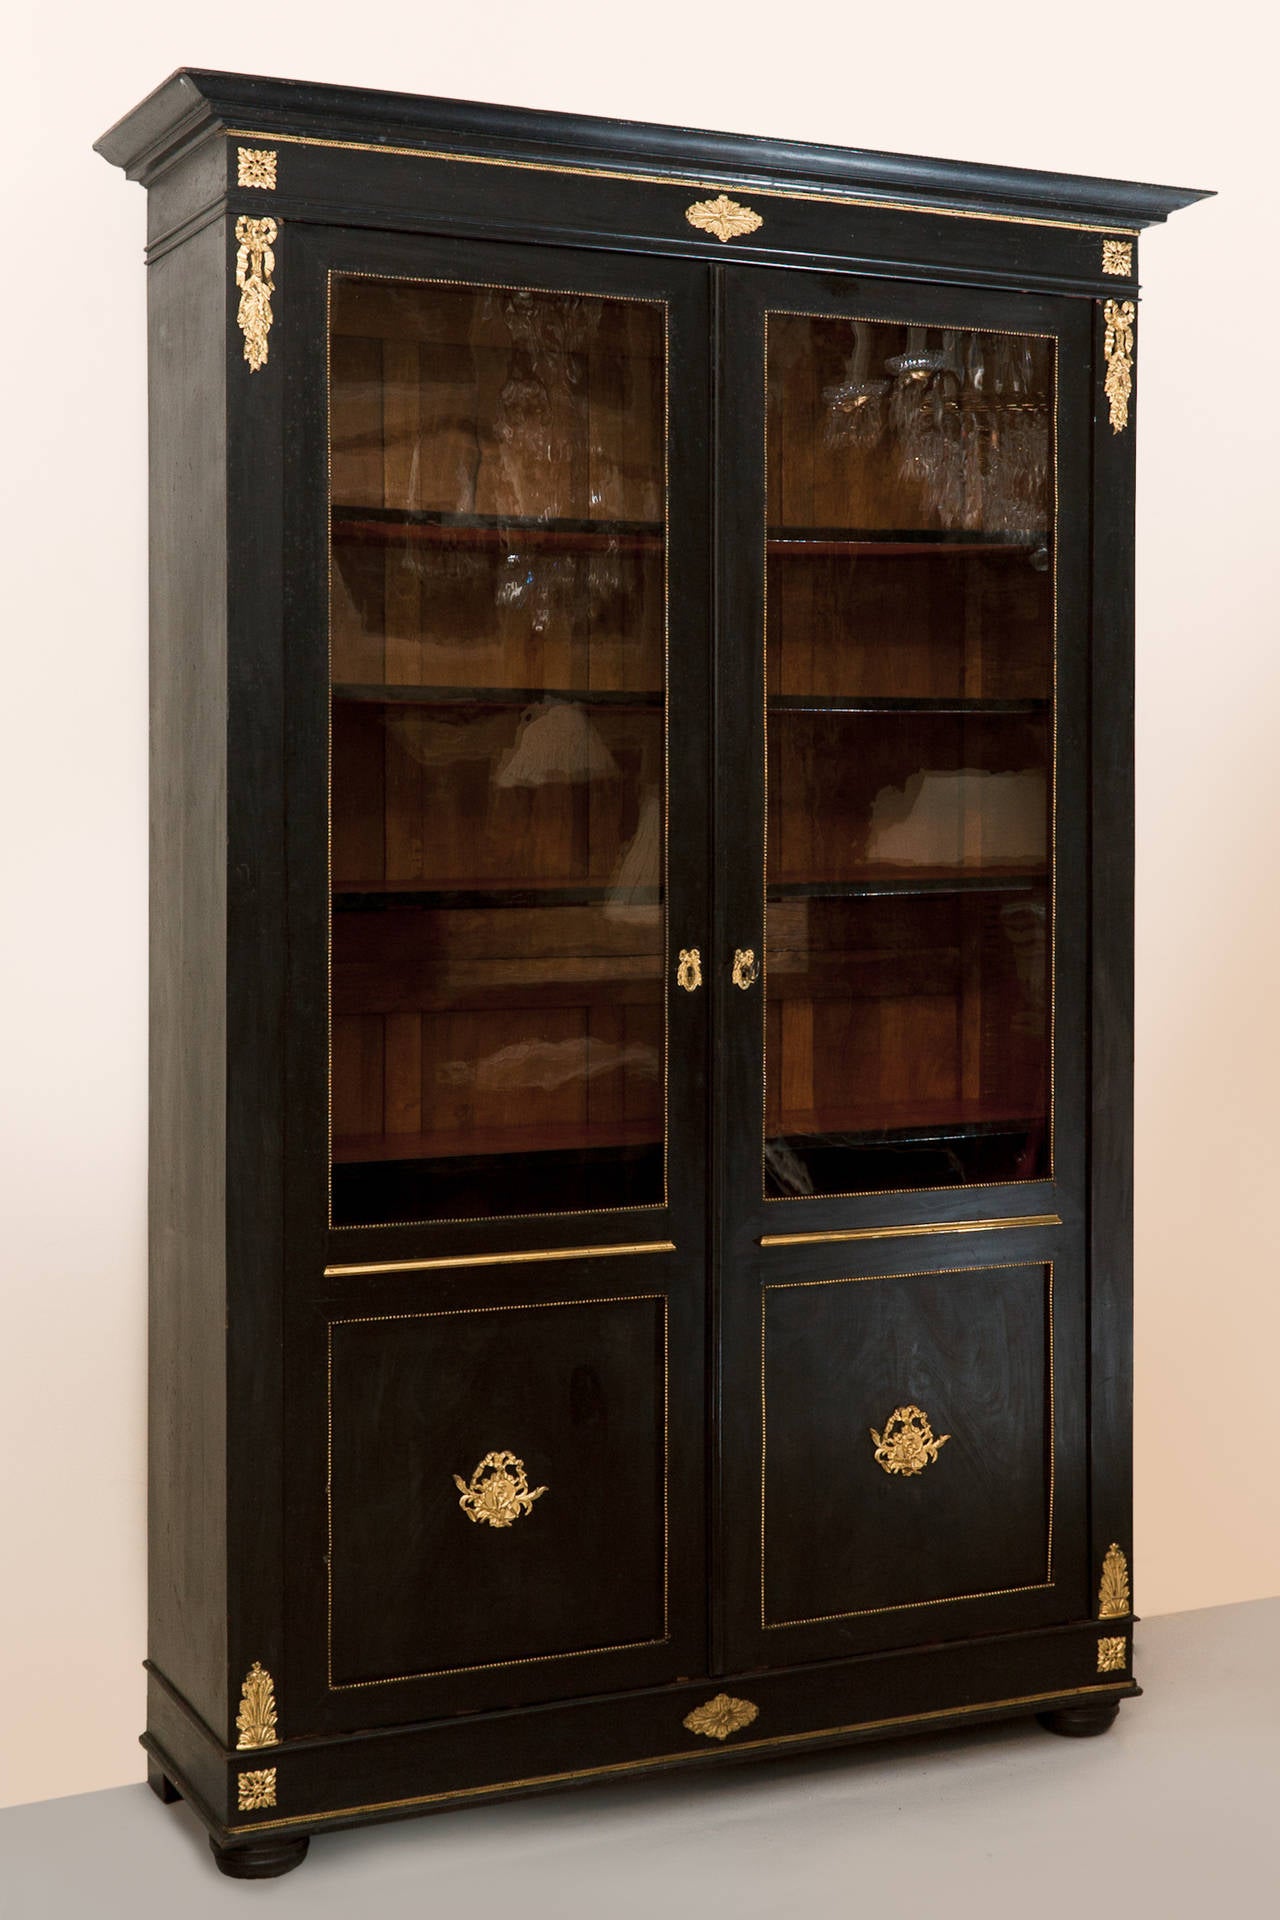 Oak and pine with two glazed doors retaining the original glass. With five pine shelves with ebonised fronts. Gilt bronze decoration including beading around the glass.